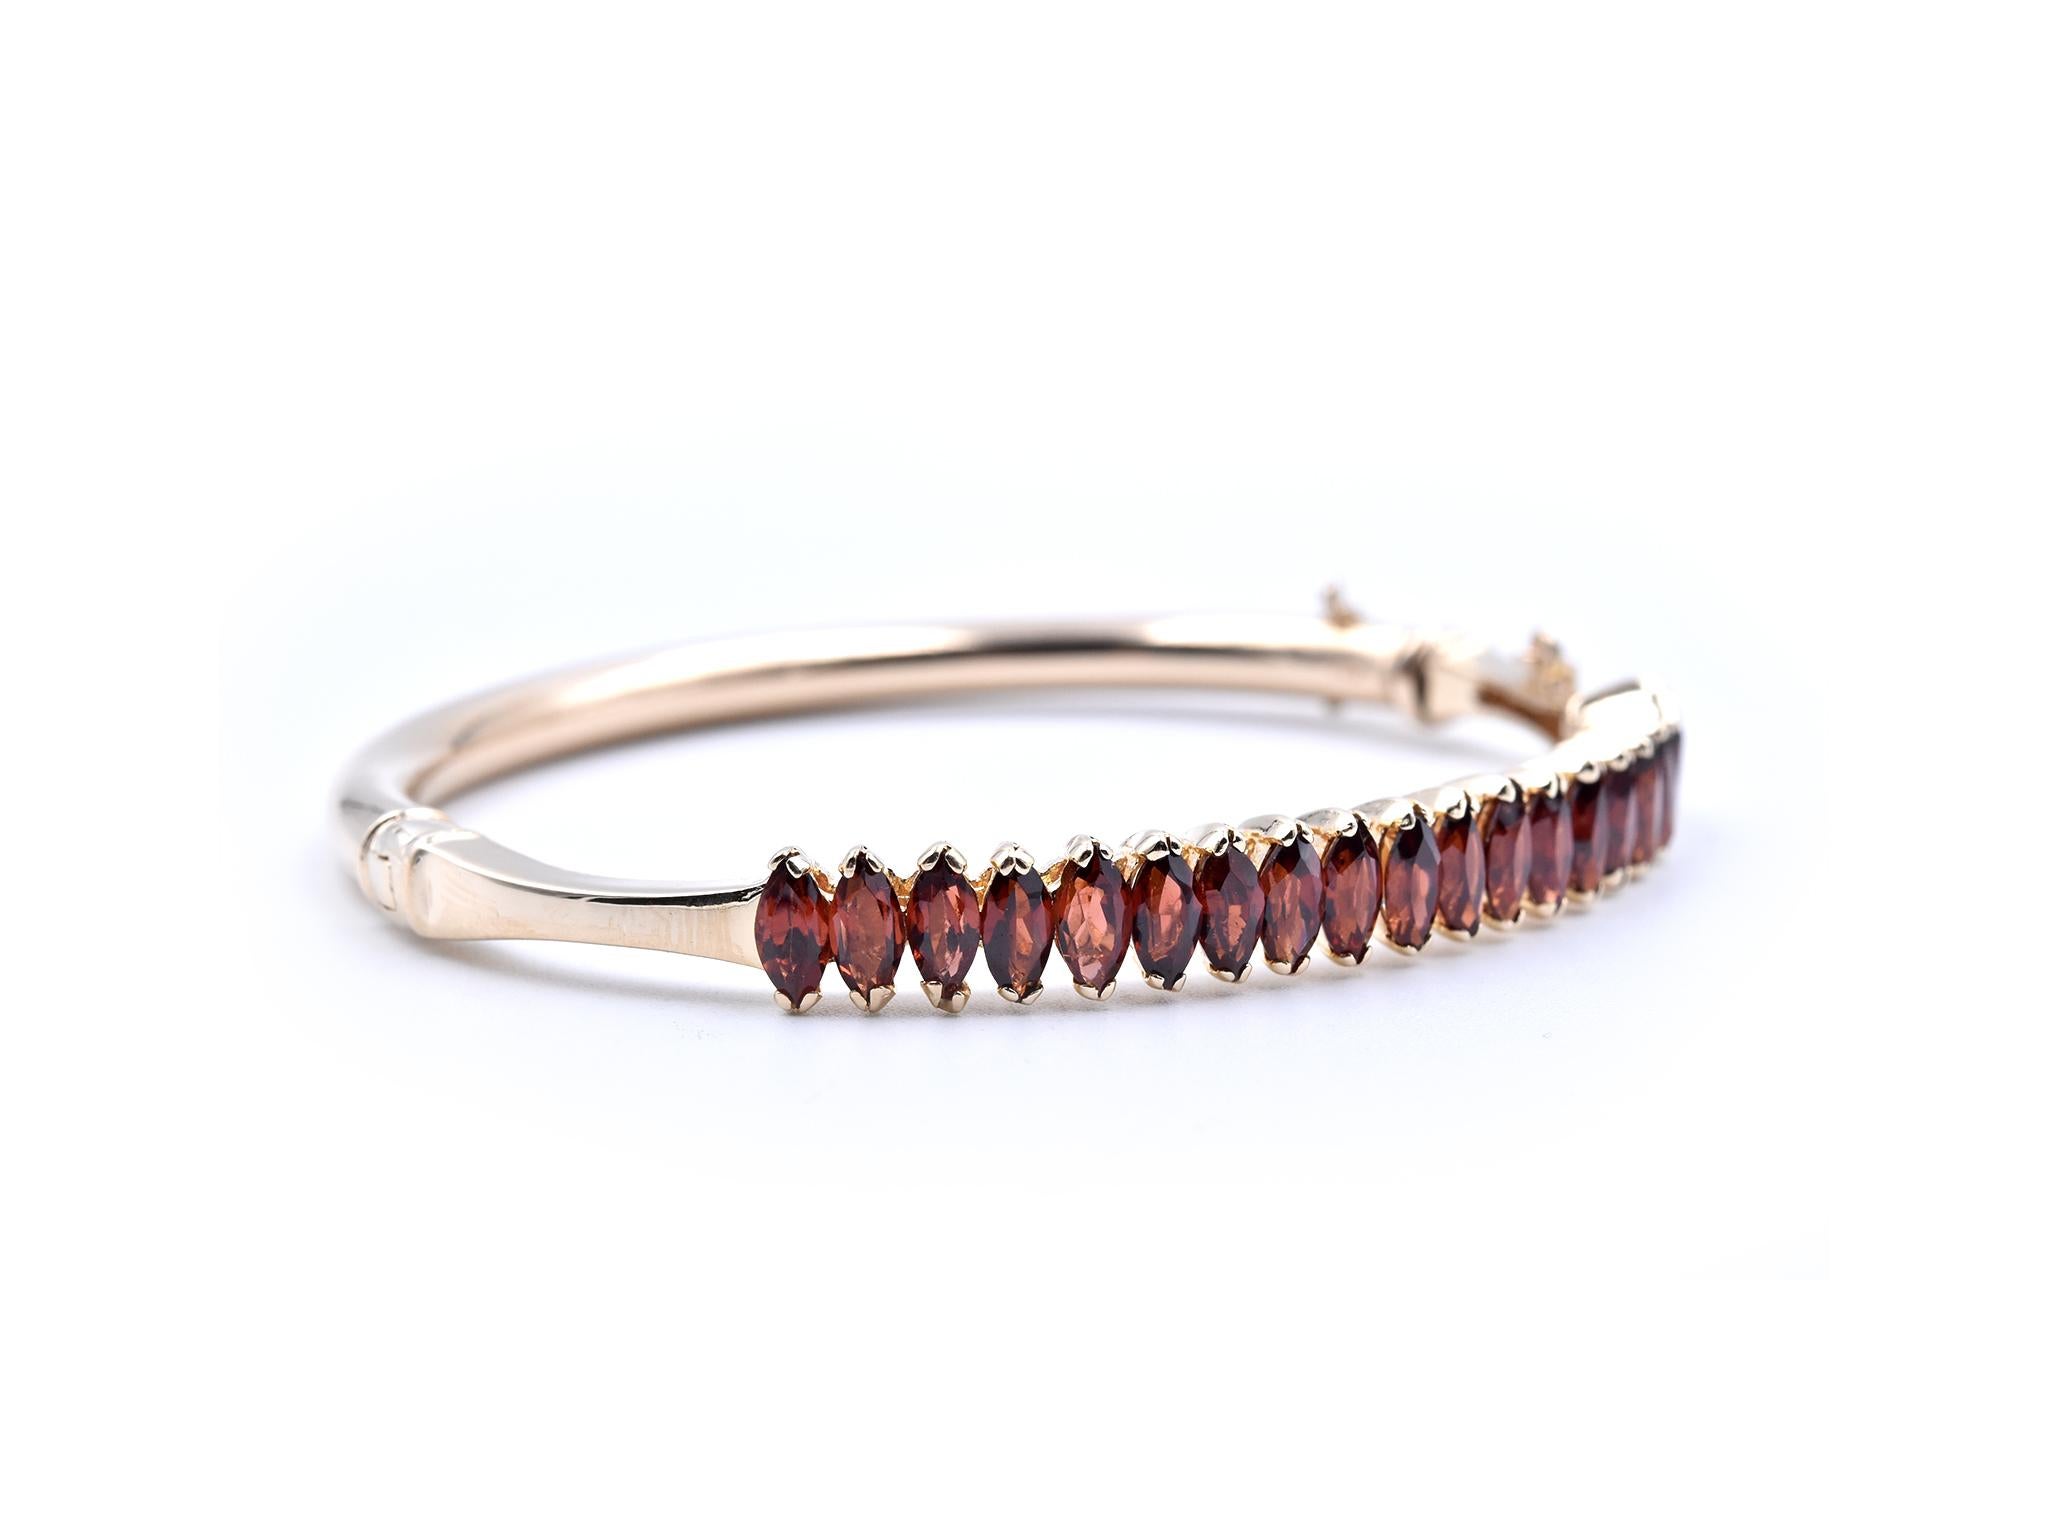 Designer: custom design
Material: 14k yellow gold
Garnets: 20 marquise cut garnets
Dimensions: bracelet will fit a 6.5-inch wrist and it measures 6.85mm wide
Weight: 17.38 grams

